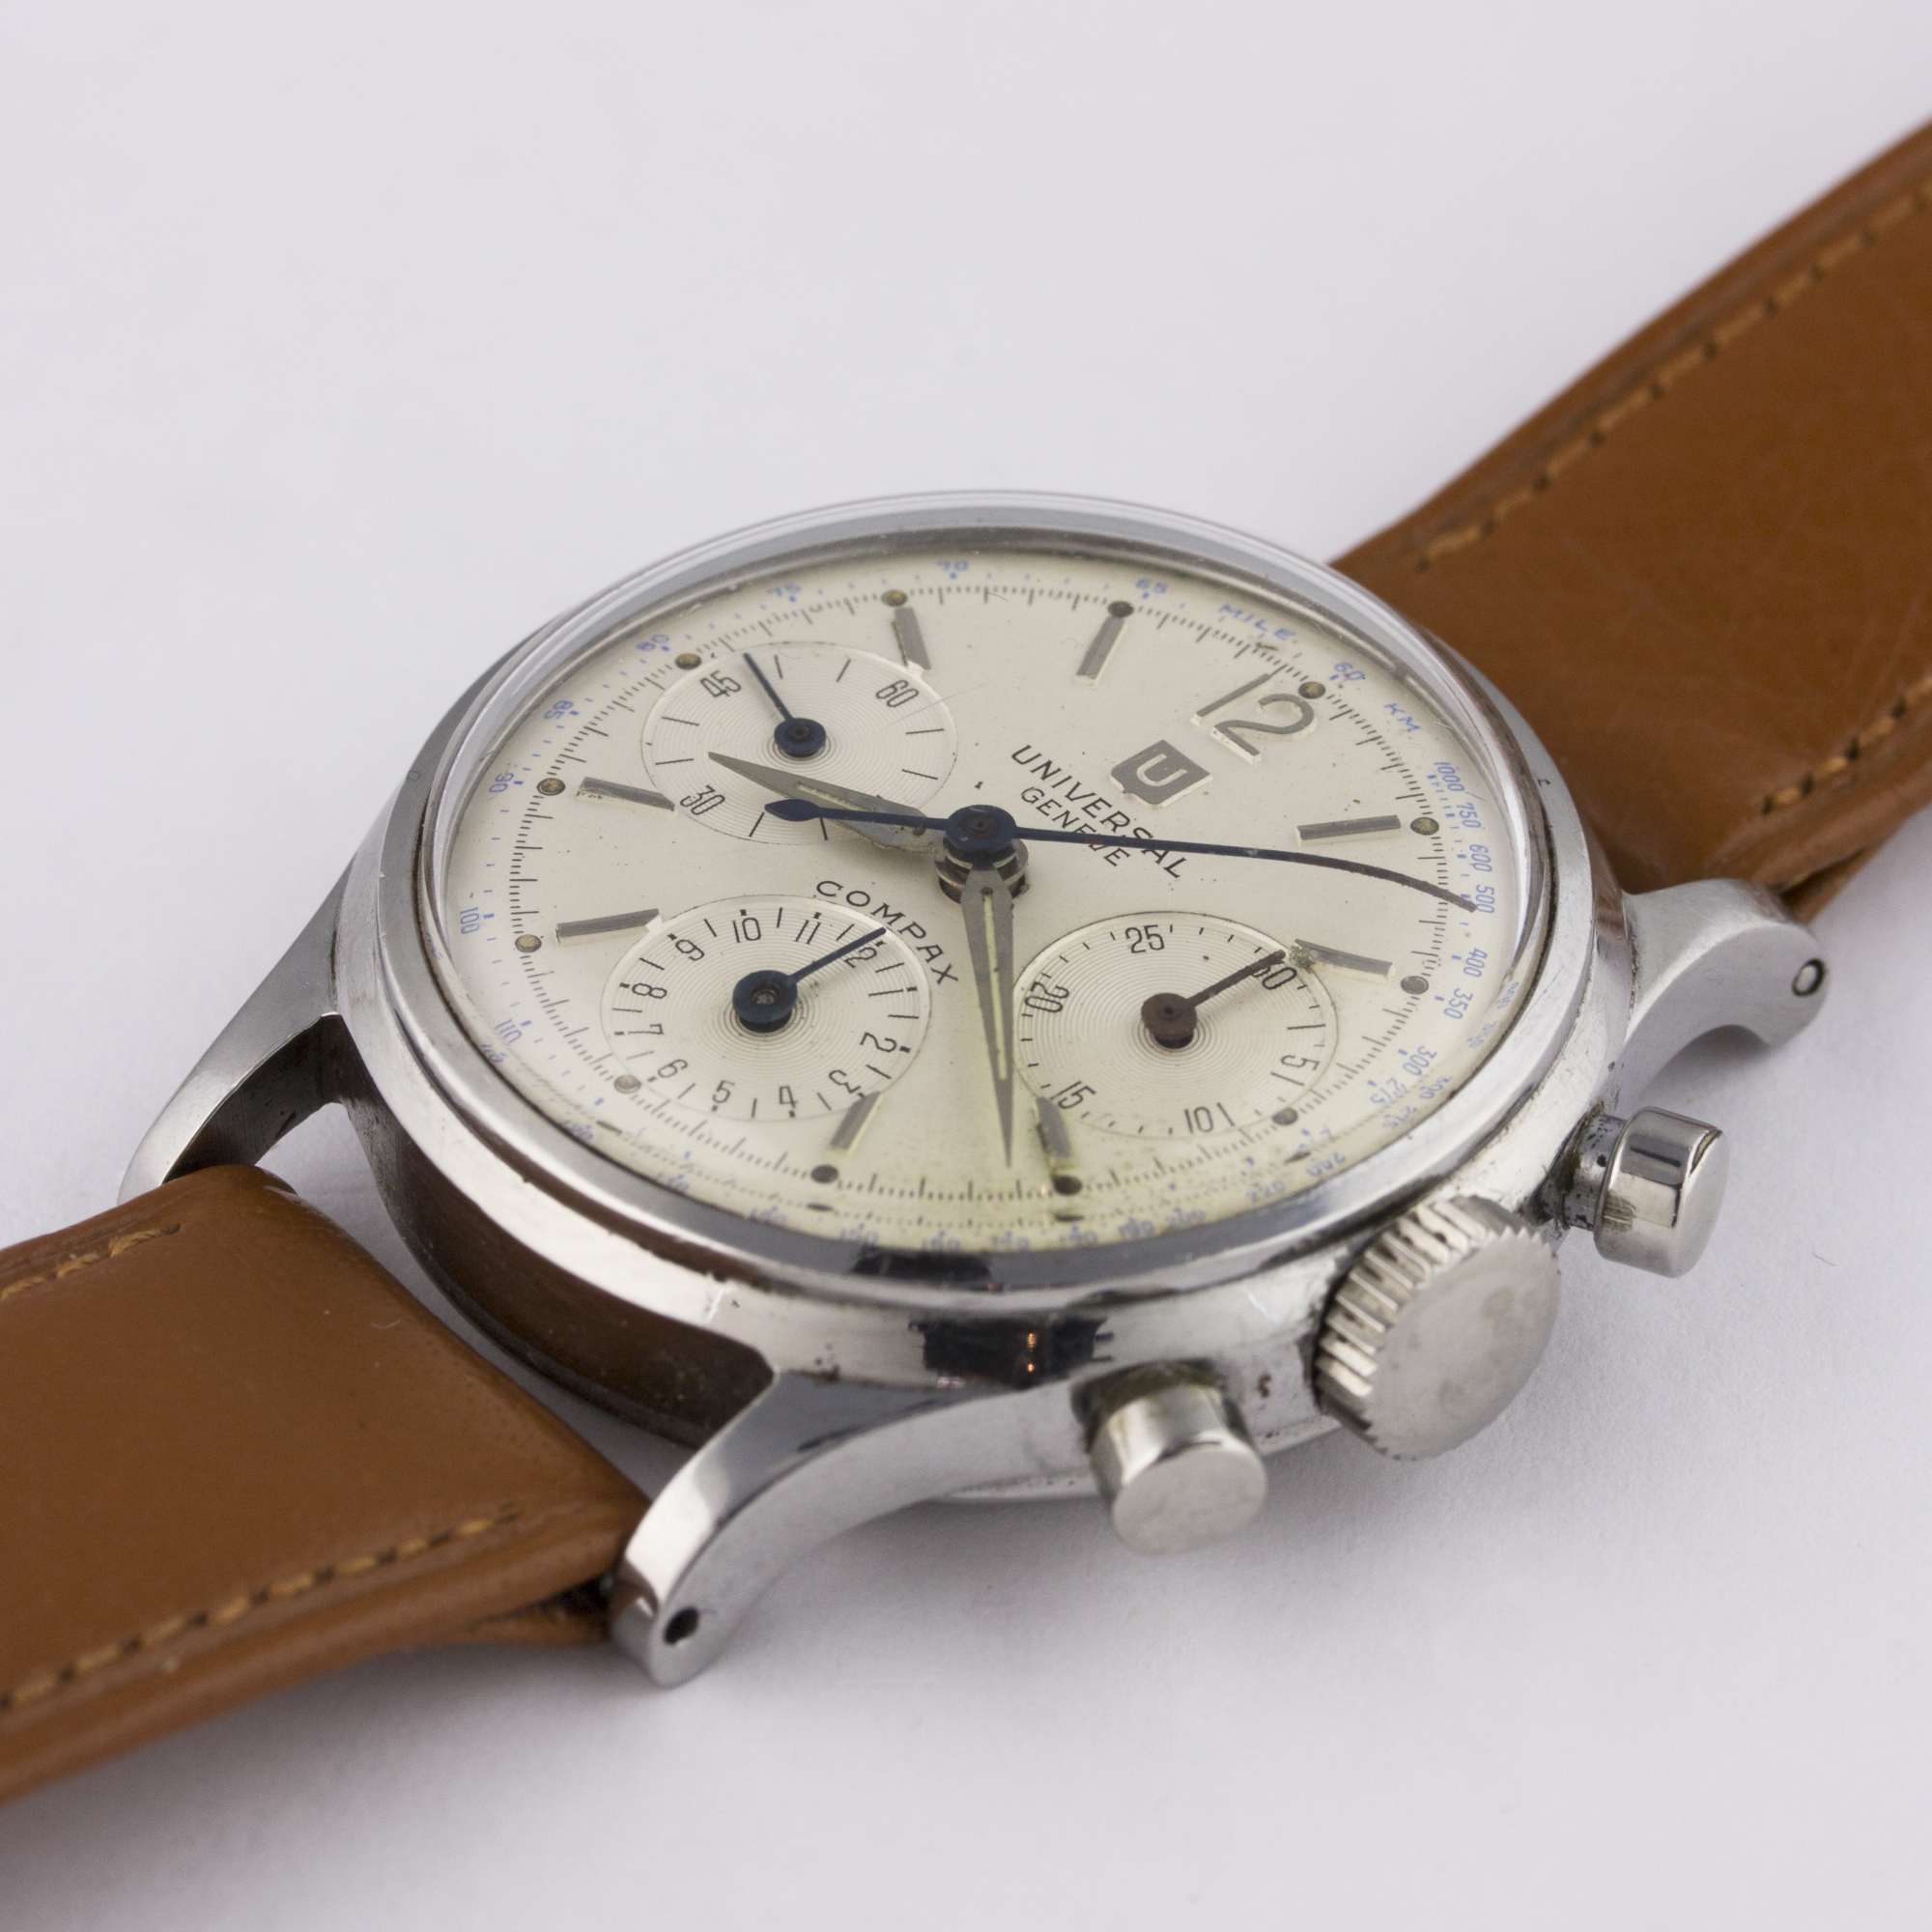 A RARE GENTLEMAN'S STAINLESS STEEL UNIVERSAL GENEVE COMPAX CHRONOGRAPH WRIST WATCH CIRCA 1950s, REF. - Image 3 of 8